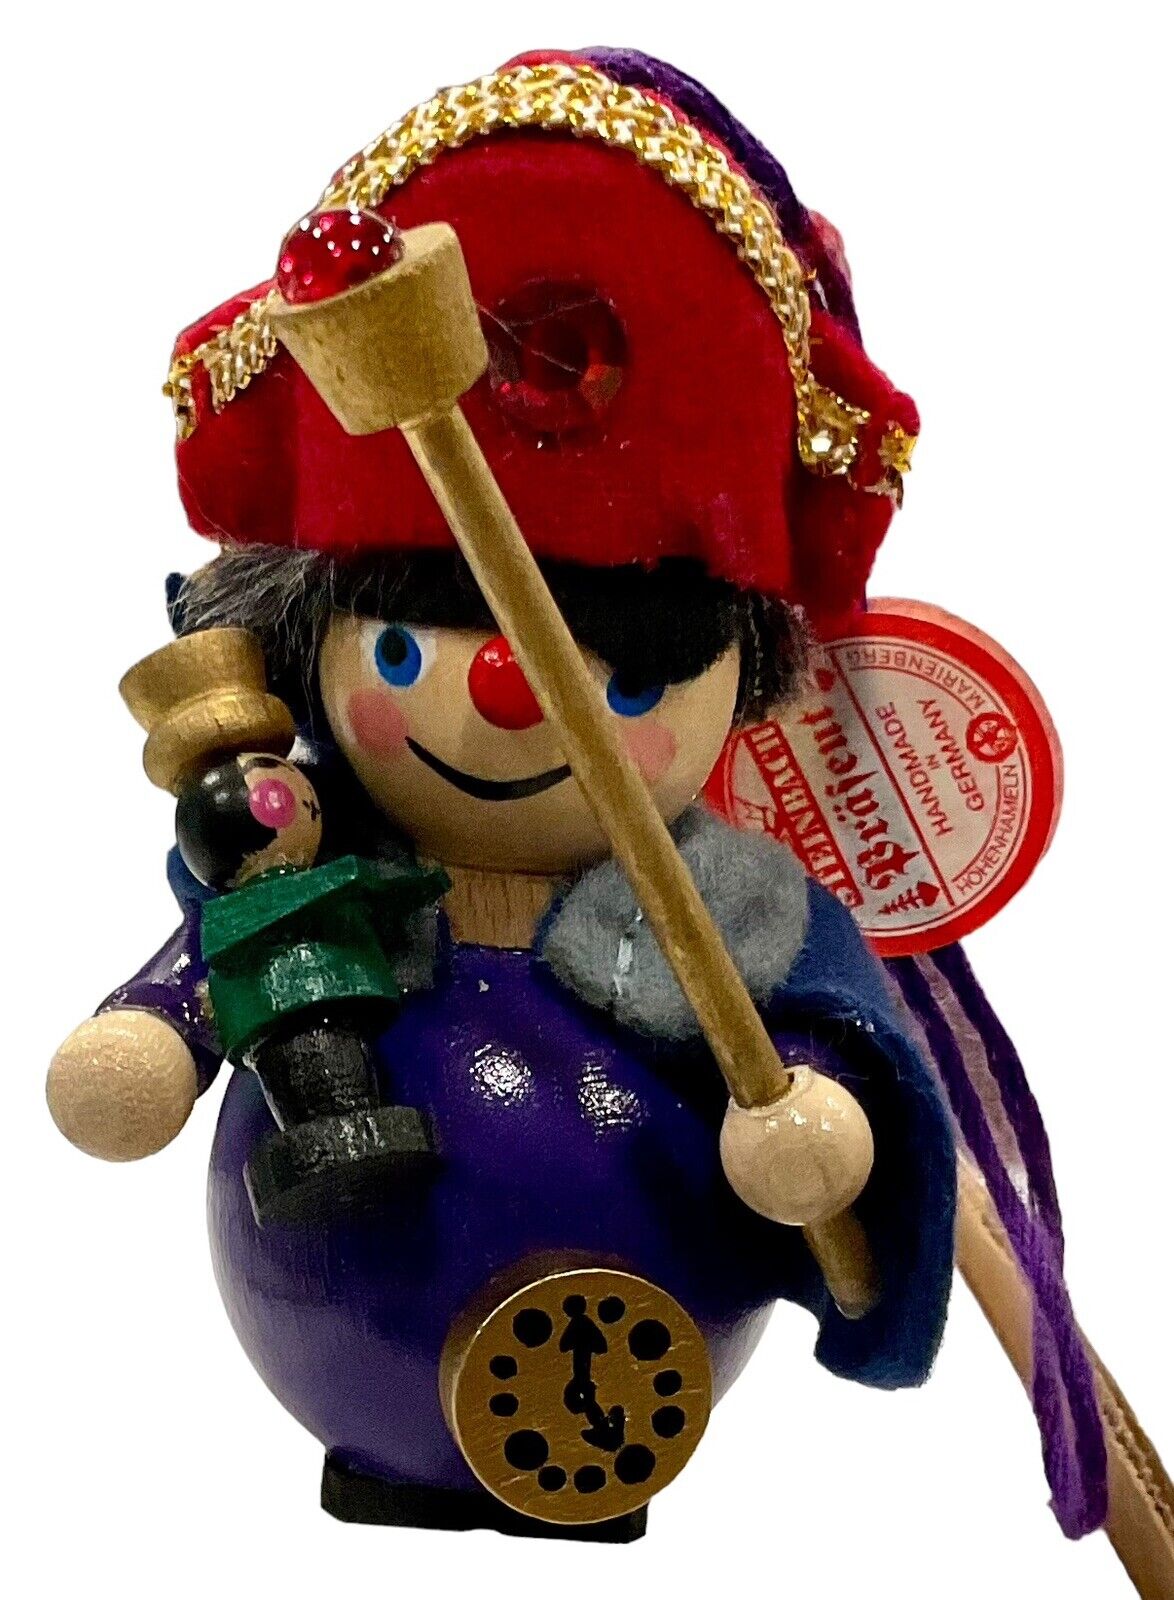 Steinbach Pirate Watchman Child Doll Wooden Christmas Ornament Made Germany